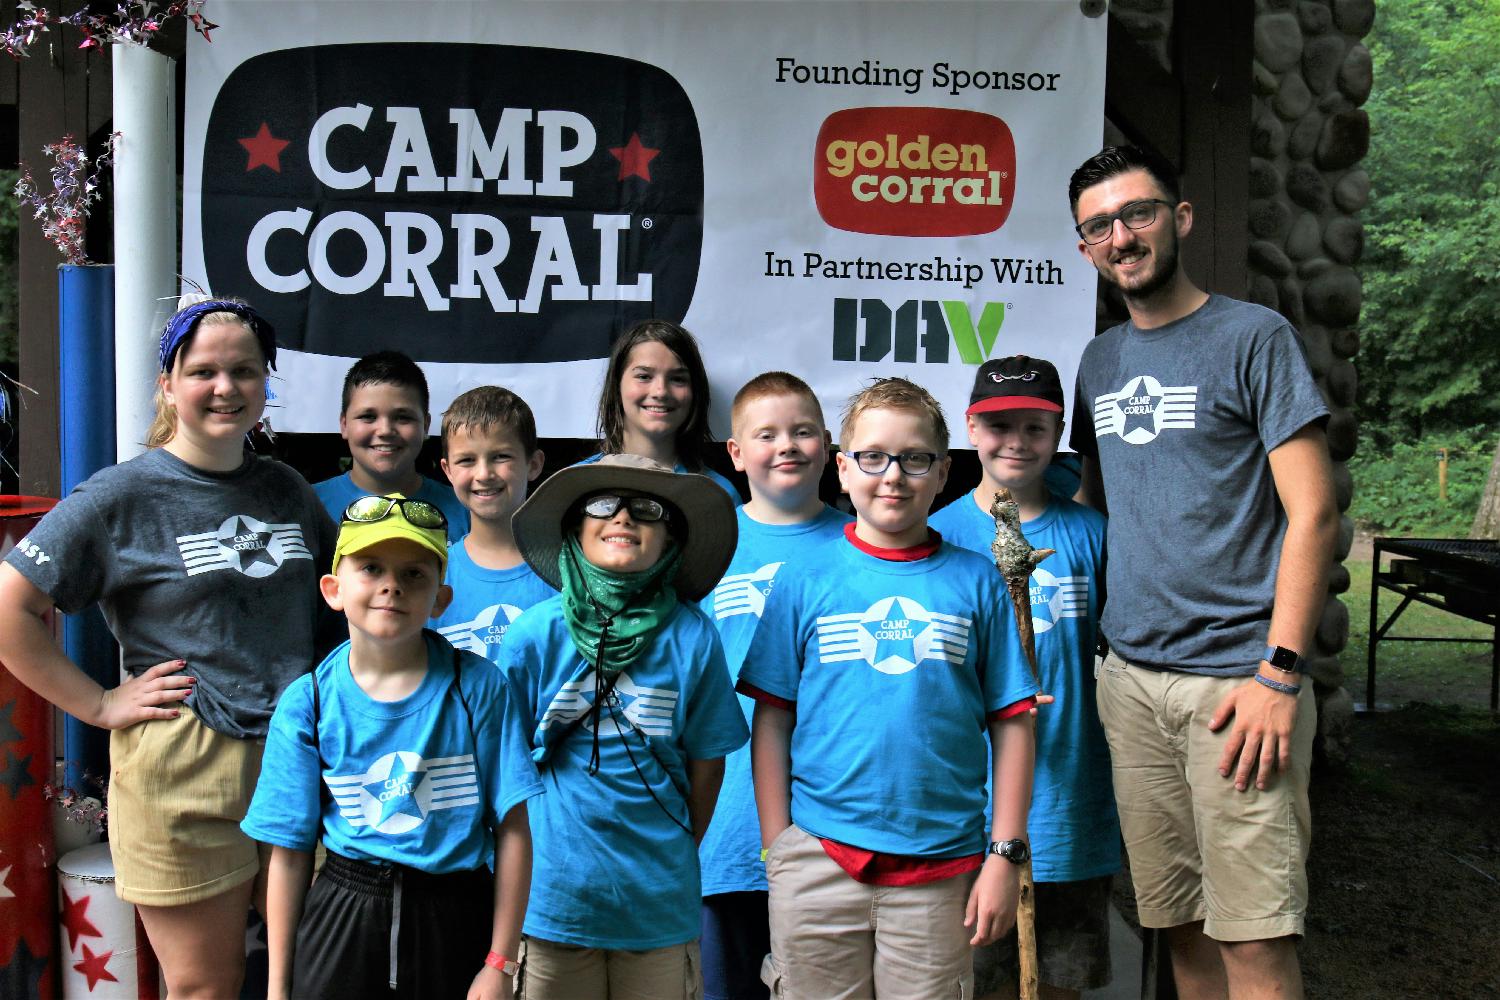 Golden Corral is the founding sponsor of Camp Corral, a one-of-a-kind, world-class camp experience that fosters positive change, increases self-confidence, and builds resilience through top-notch programming at some of the best camps in the United States. Camp Corral transforms the lives of children of wounded, injured, ill and fallen military heroes by providing a unique summer camp experience.